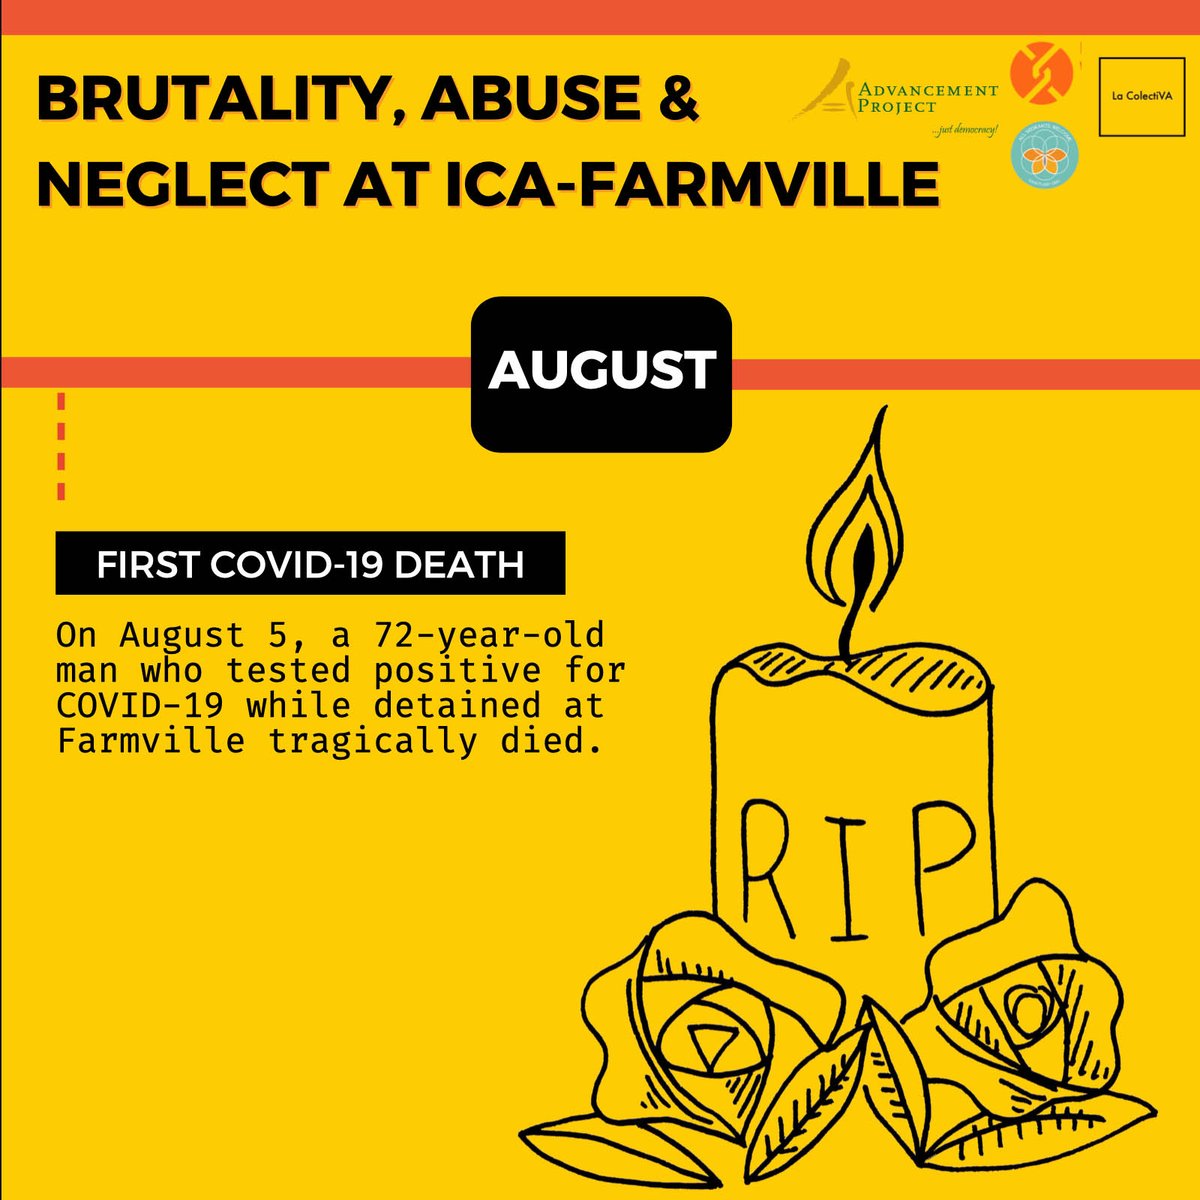 NIJC:The pandemic has made the already deplorable conditions, neglect and abuse at ICA-Farmville even worse. 

The only solution to curbing the spread of COVID-19 is to #FreeThemAll and #ShutDownFarmville. 3/